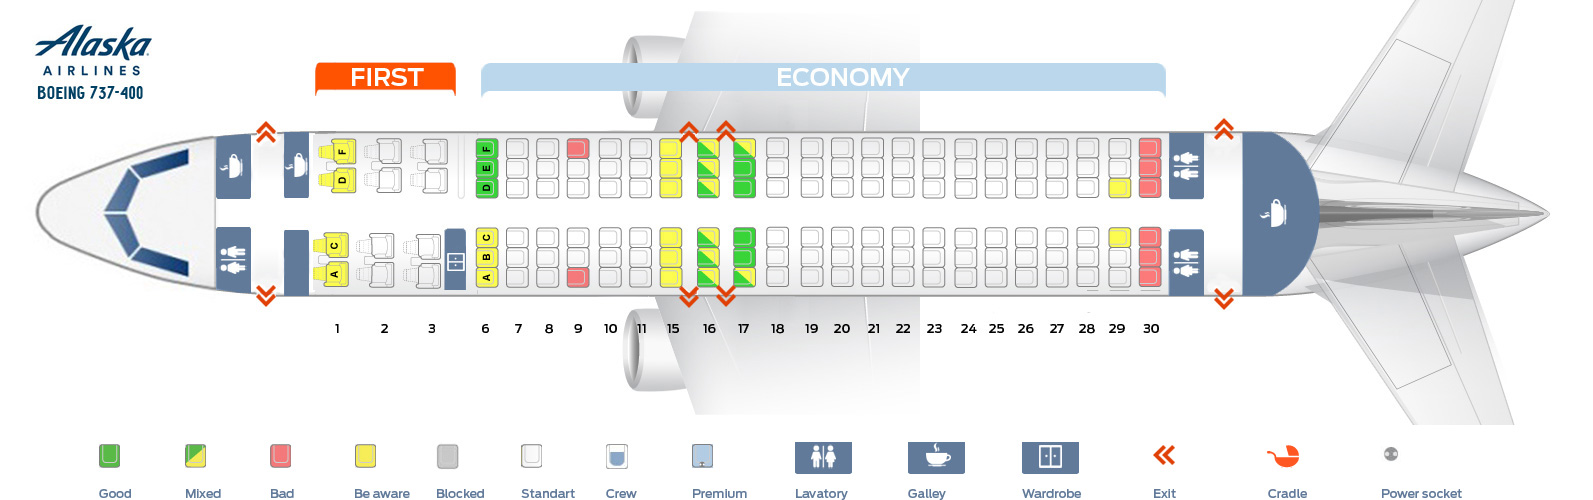 Boeing 737 400 Jet Seating Chart